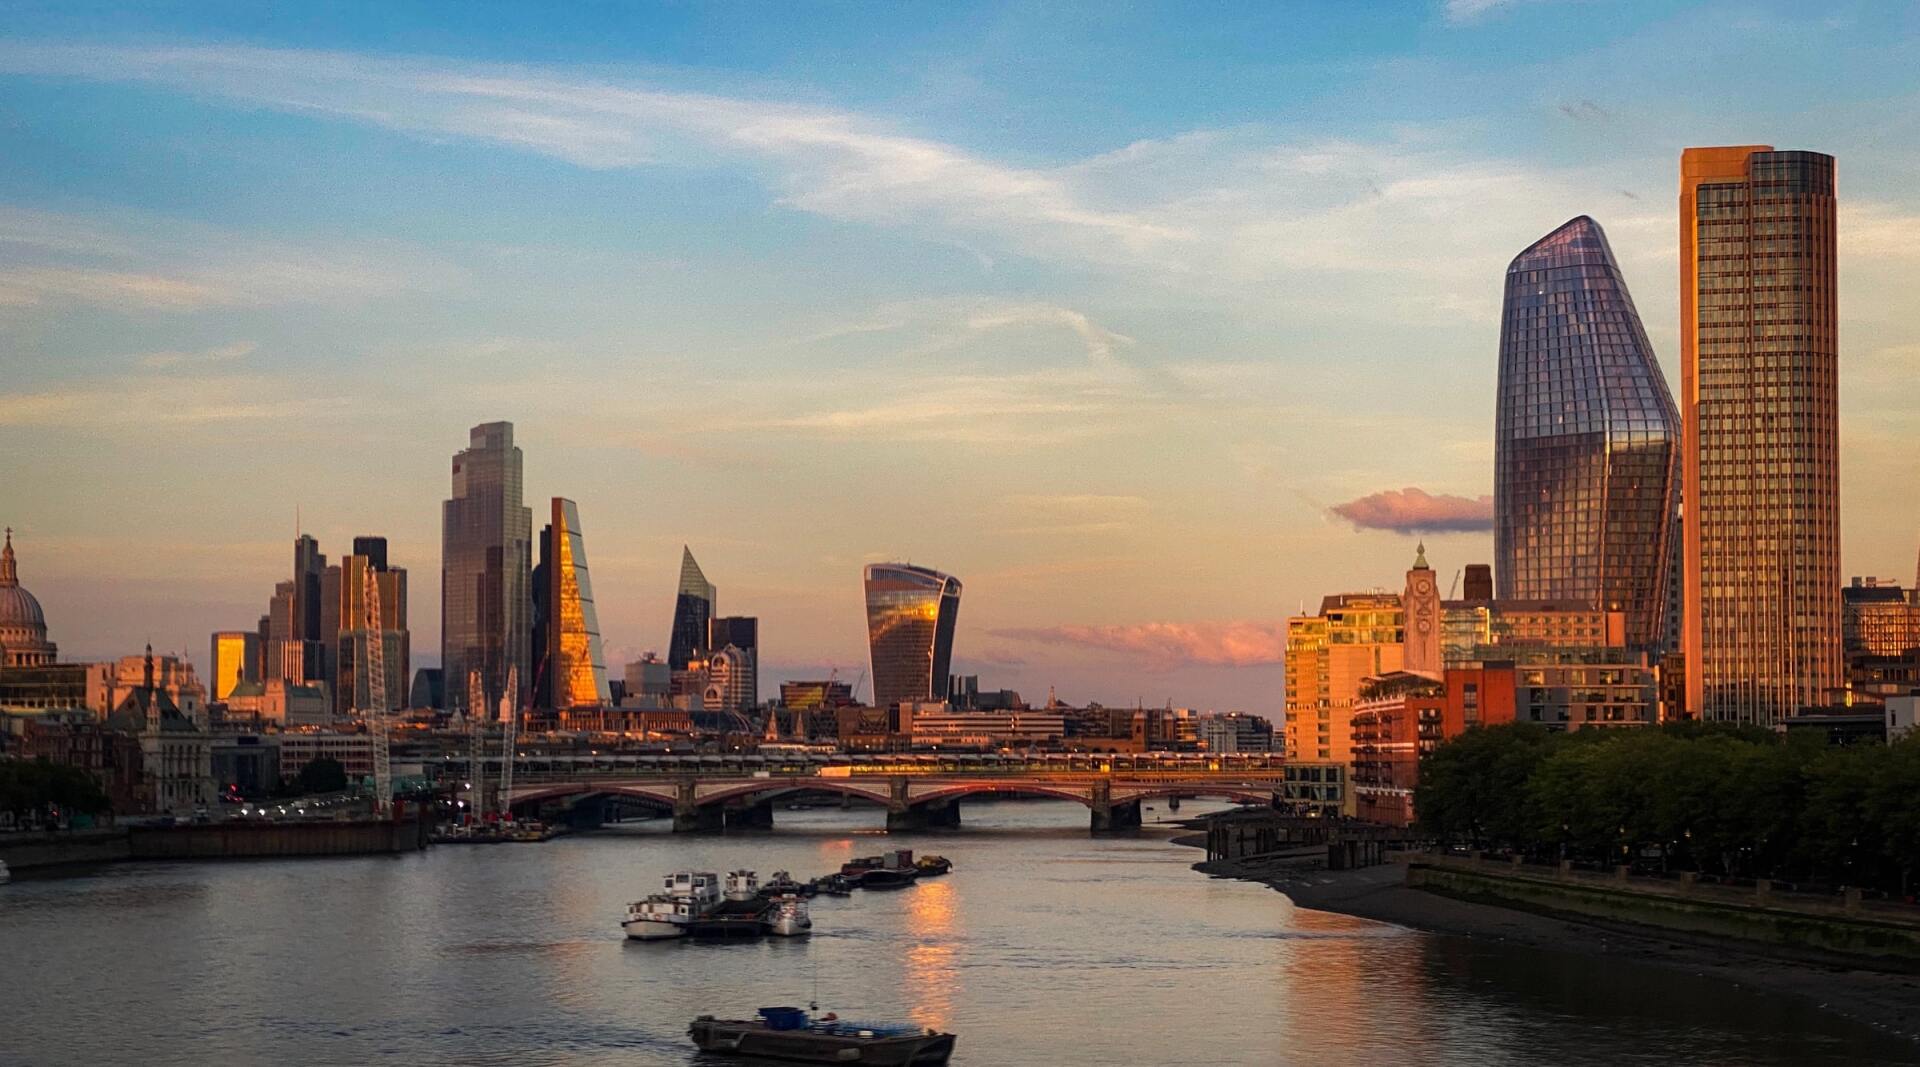 City scape of London across The Thames while the sun rises